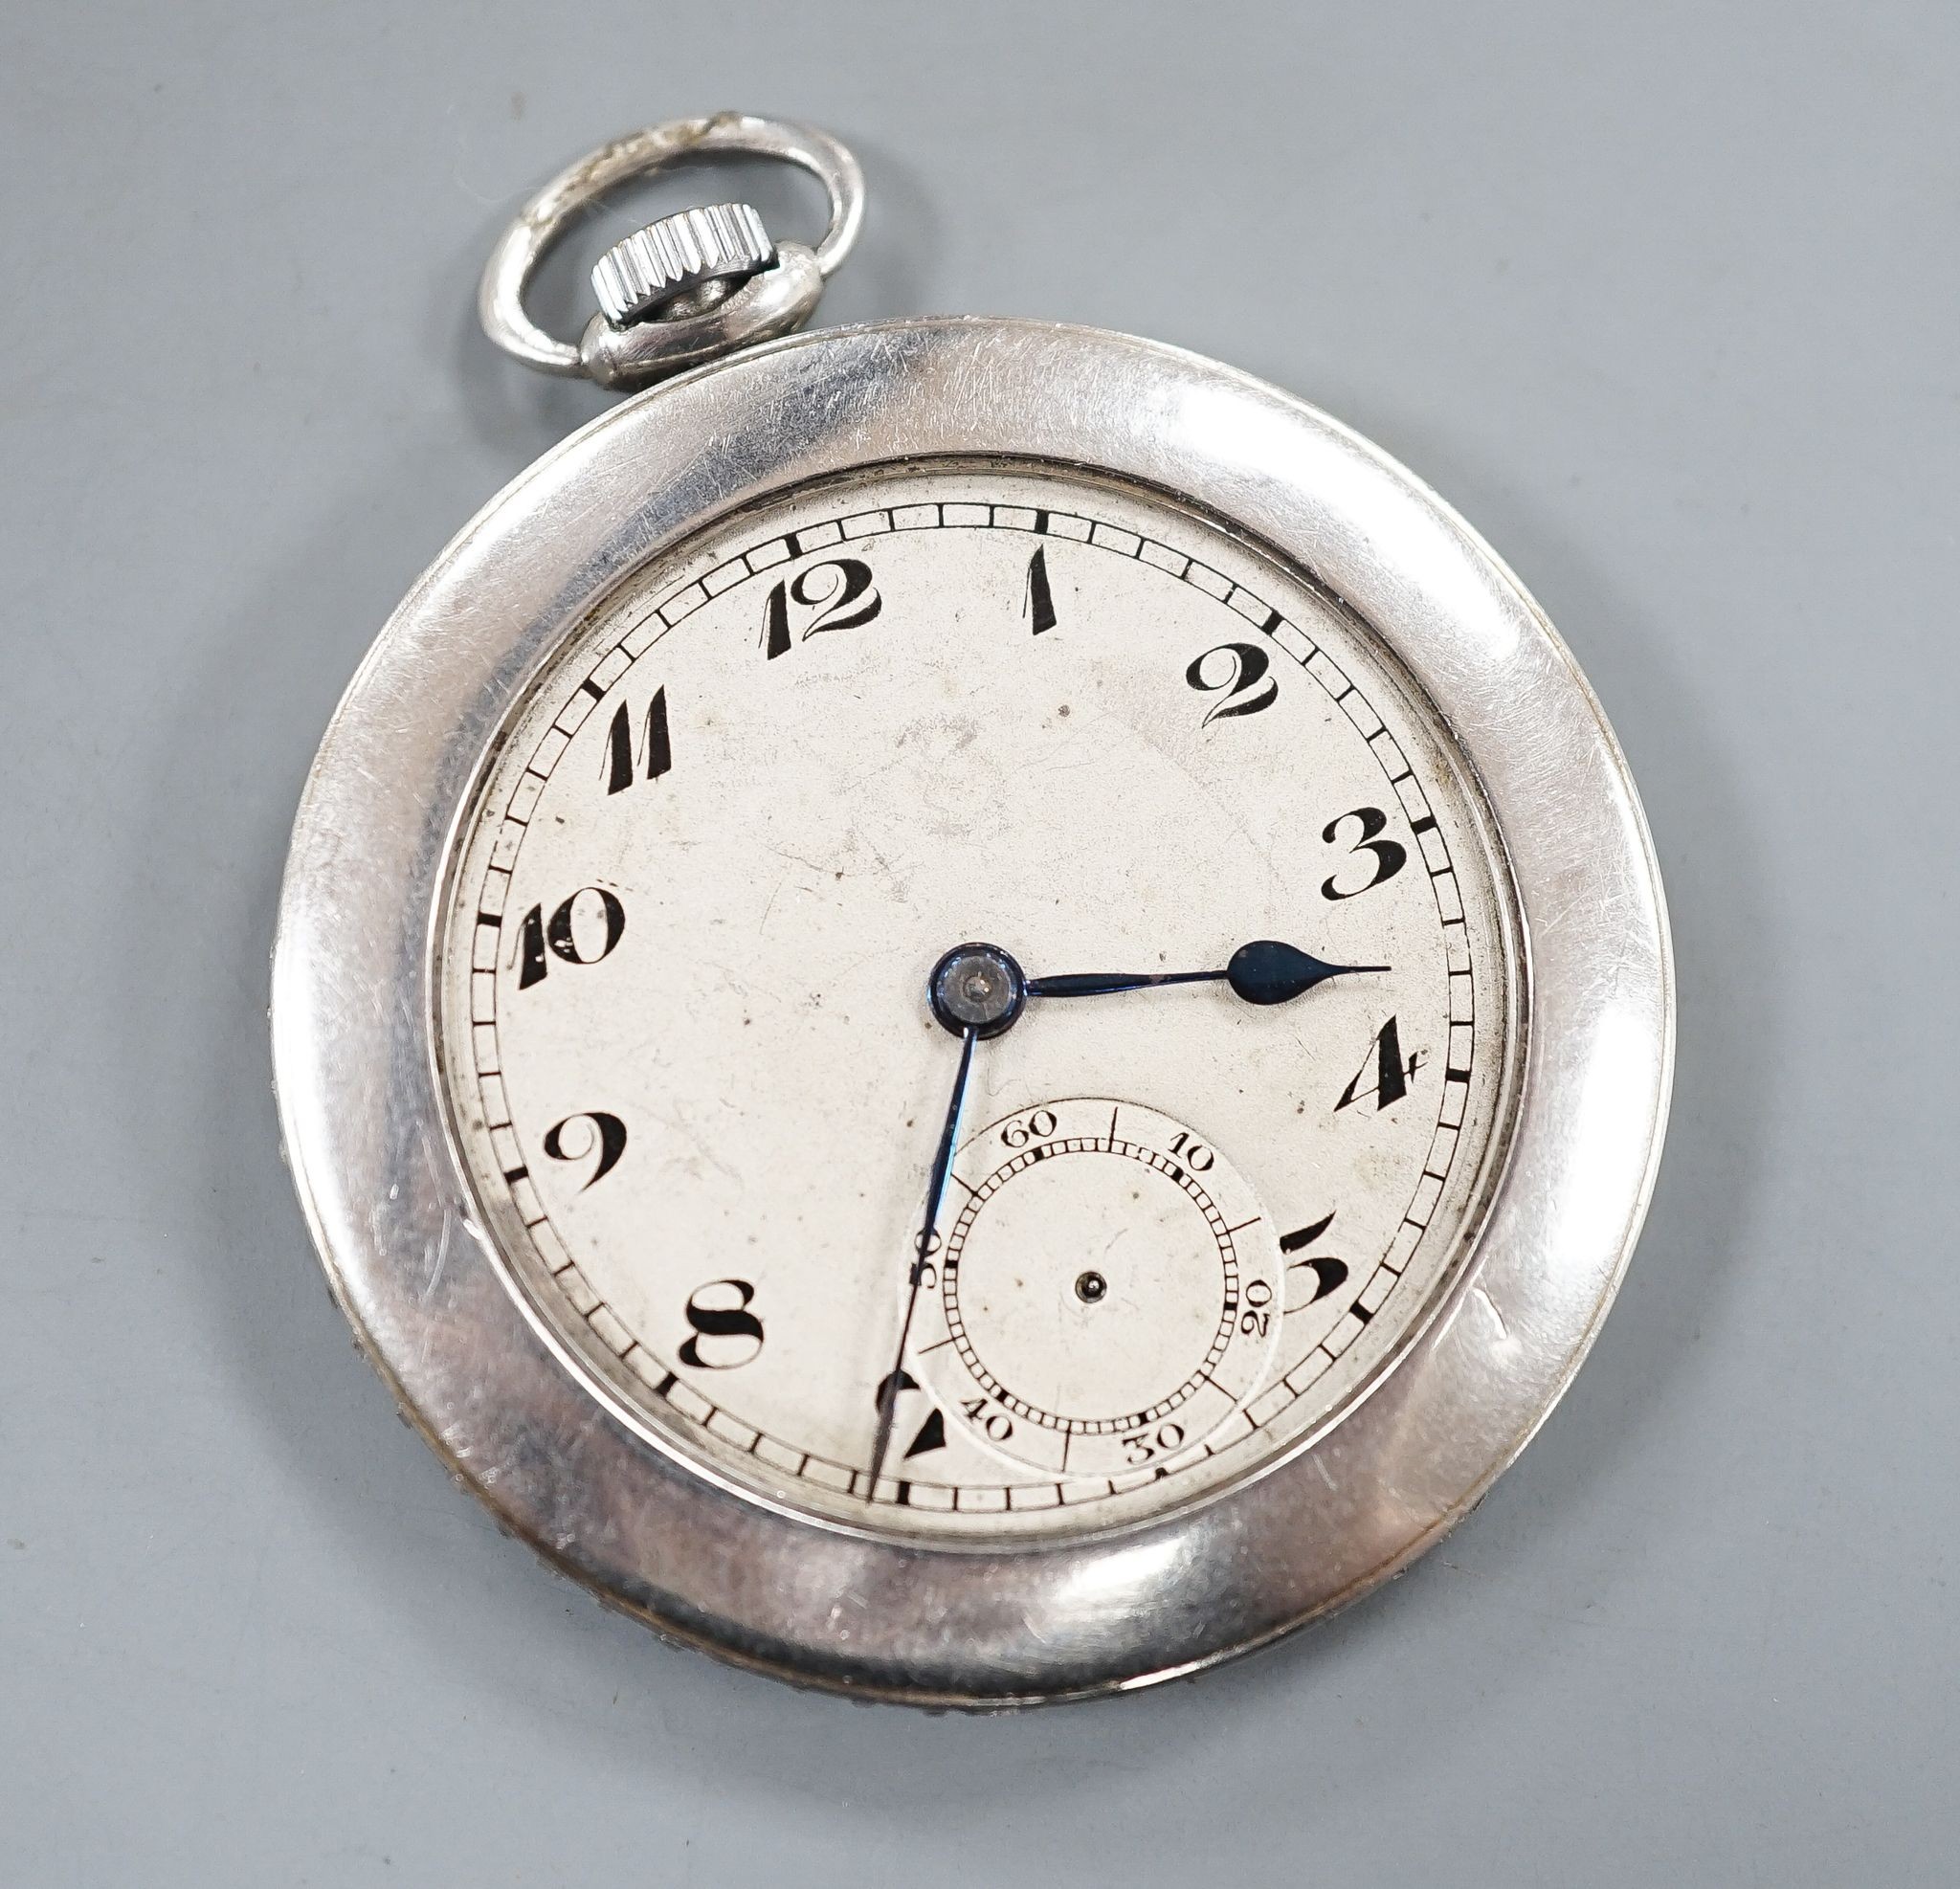 A mid 20th century white metal (stamped plat) and diamond set keyless open faced dress pocket watch, by Helbros Watch Co. case diameter 46mm, gross weight 48.6 grams, lacking glass cover.